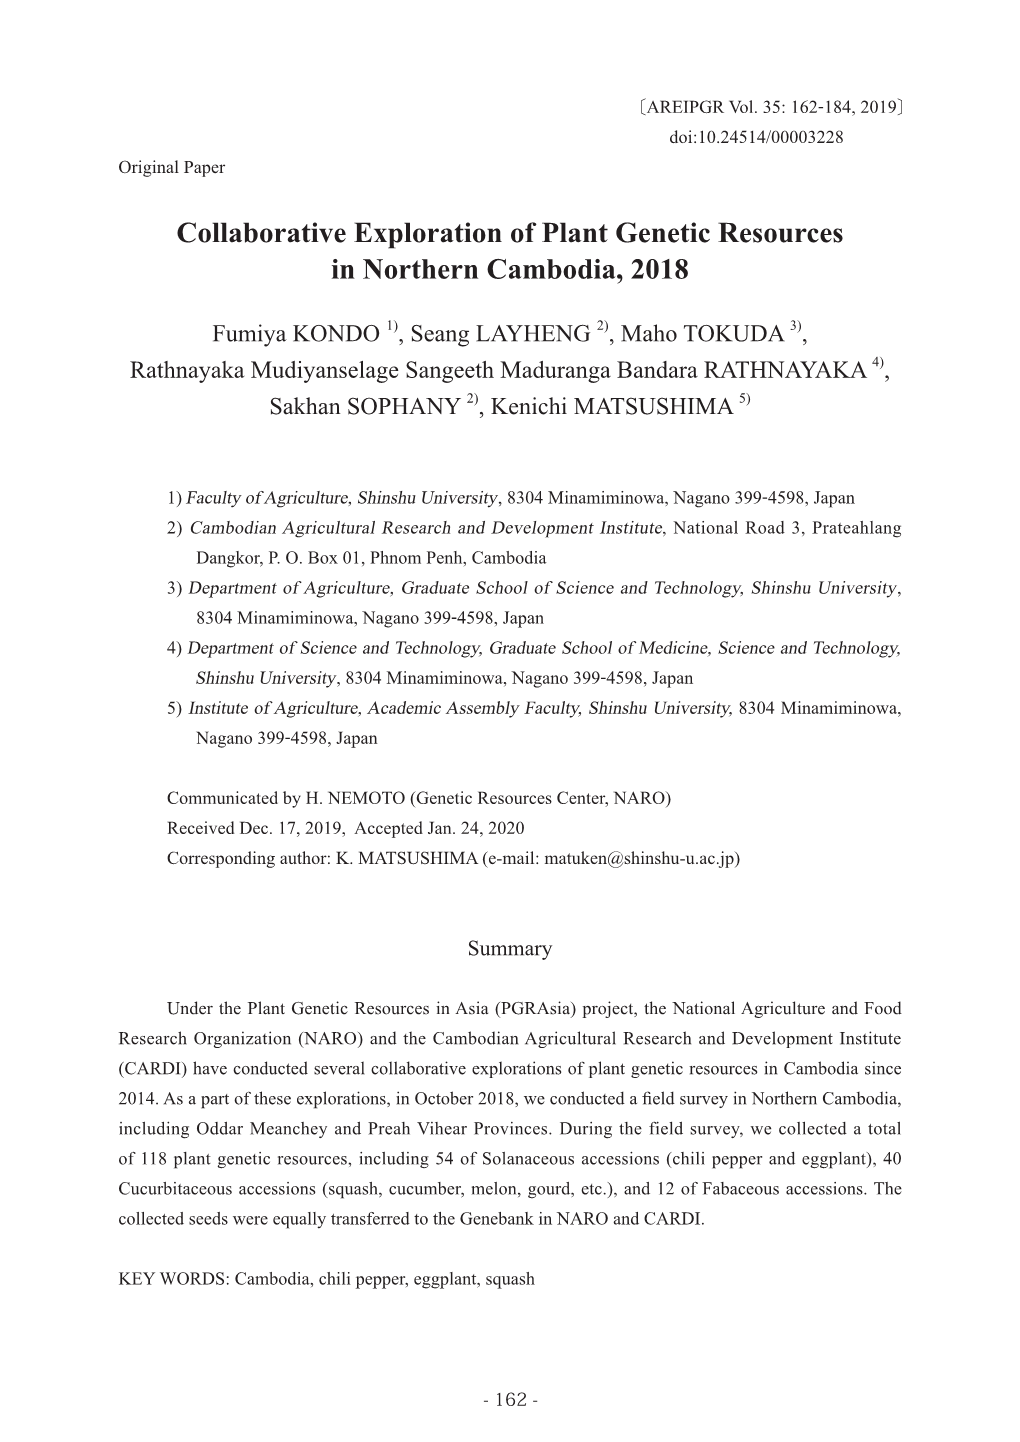 Collaborative Exploration of Plant Genetic Resources in Northern Cambodia, 2018